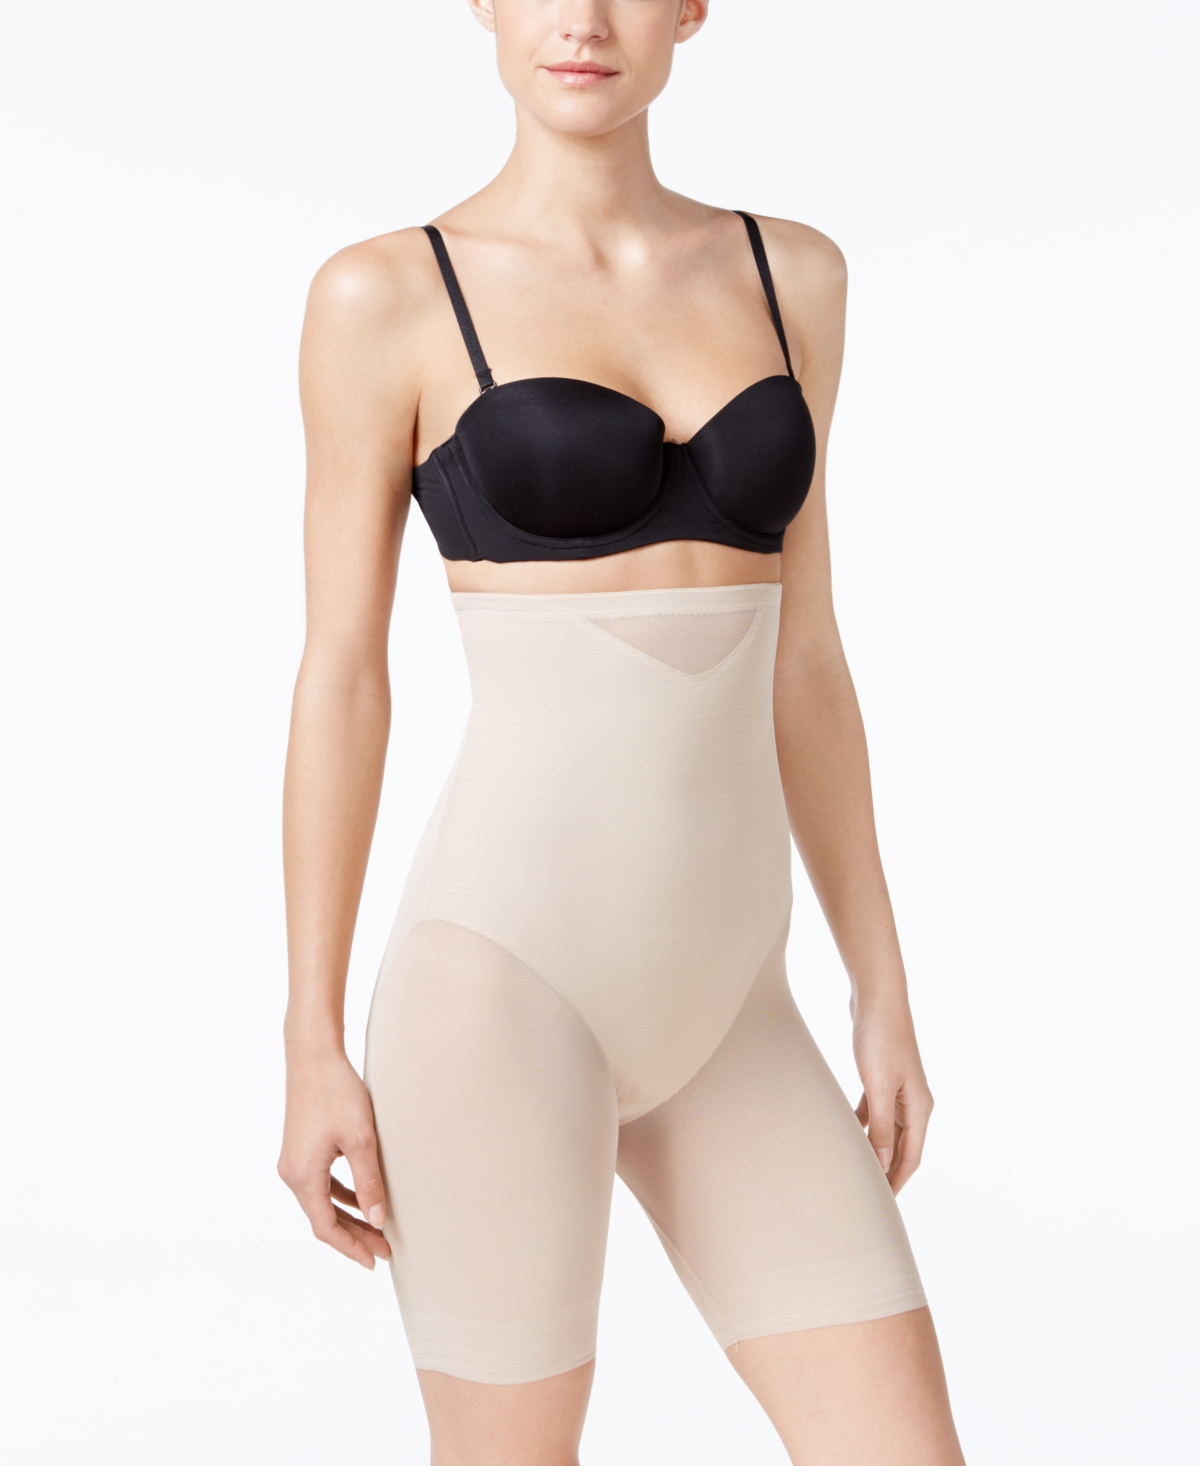 UPC 080225333534 product image for Miraclesuit Women's Extra Firm Tummy-Control Sheer Trim Thigh Slimmer 2789 | upcitemdb.com